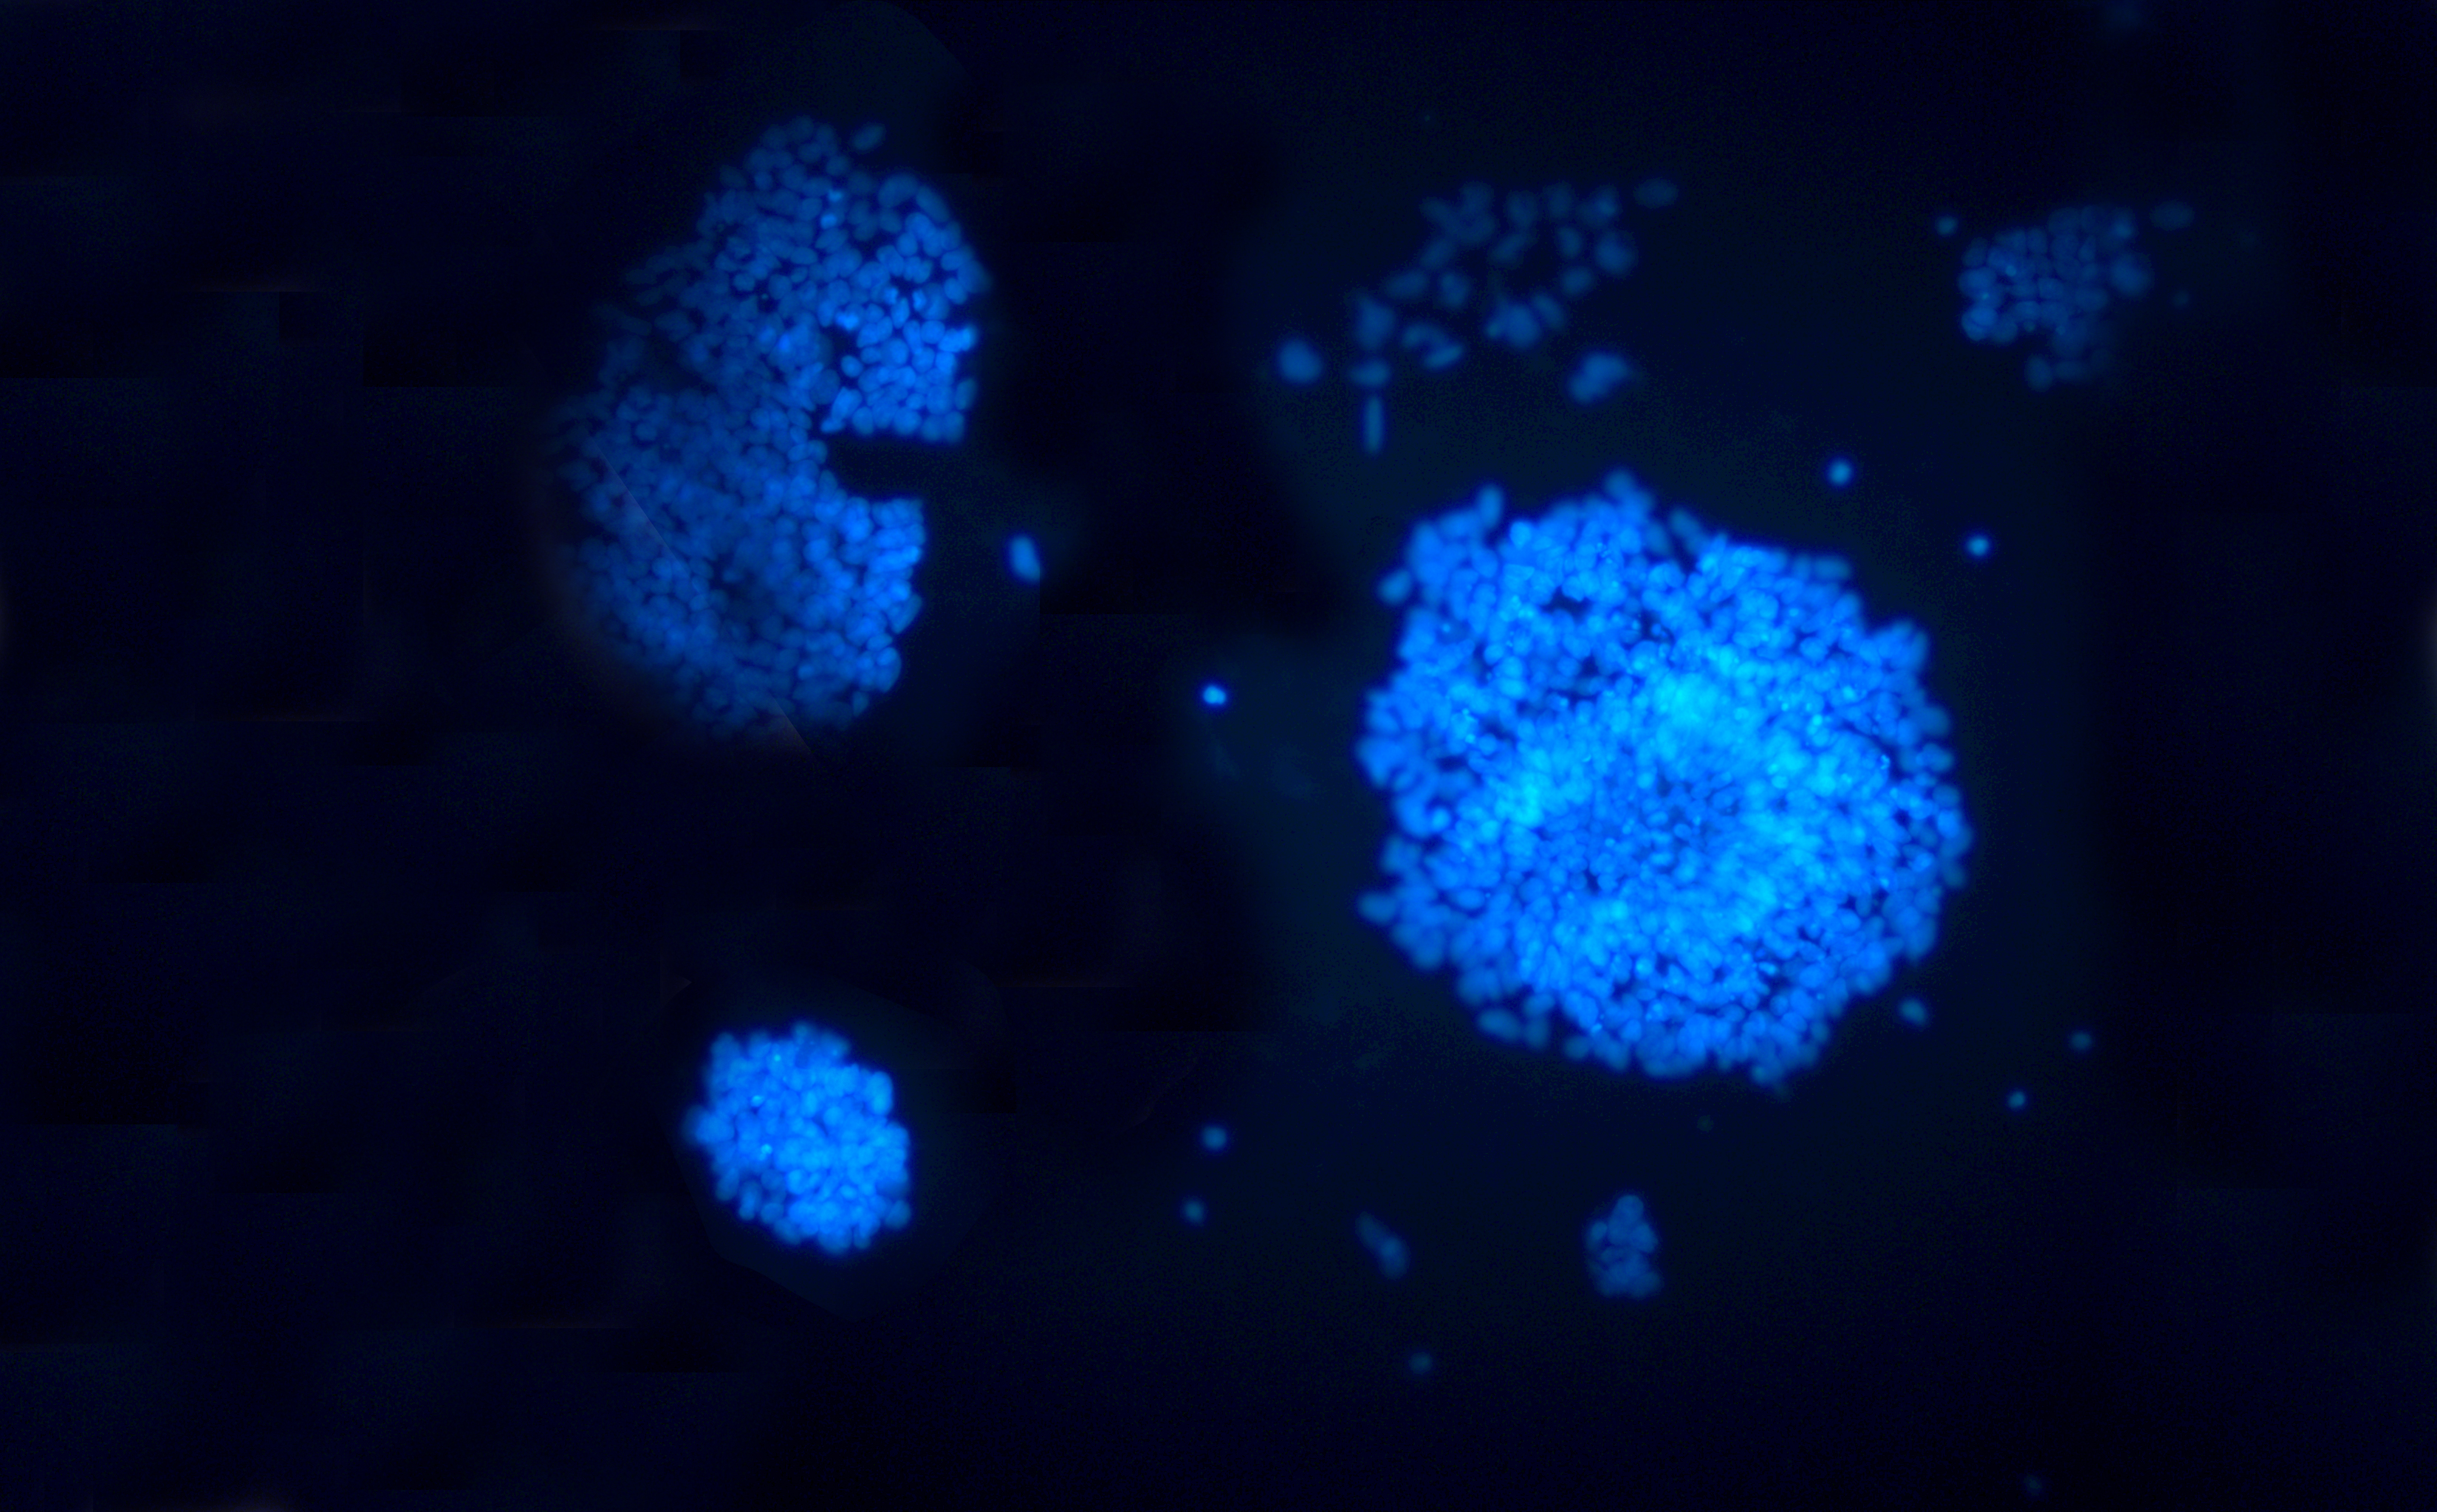 Human embryonic stem cells grown in UConn's Stem Cell Core Laboratory. (UConn Photo)